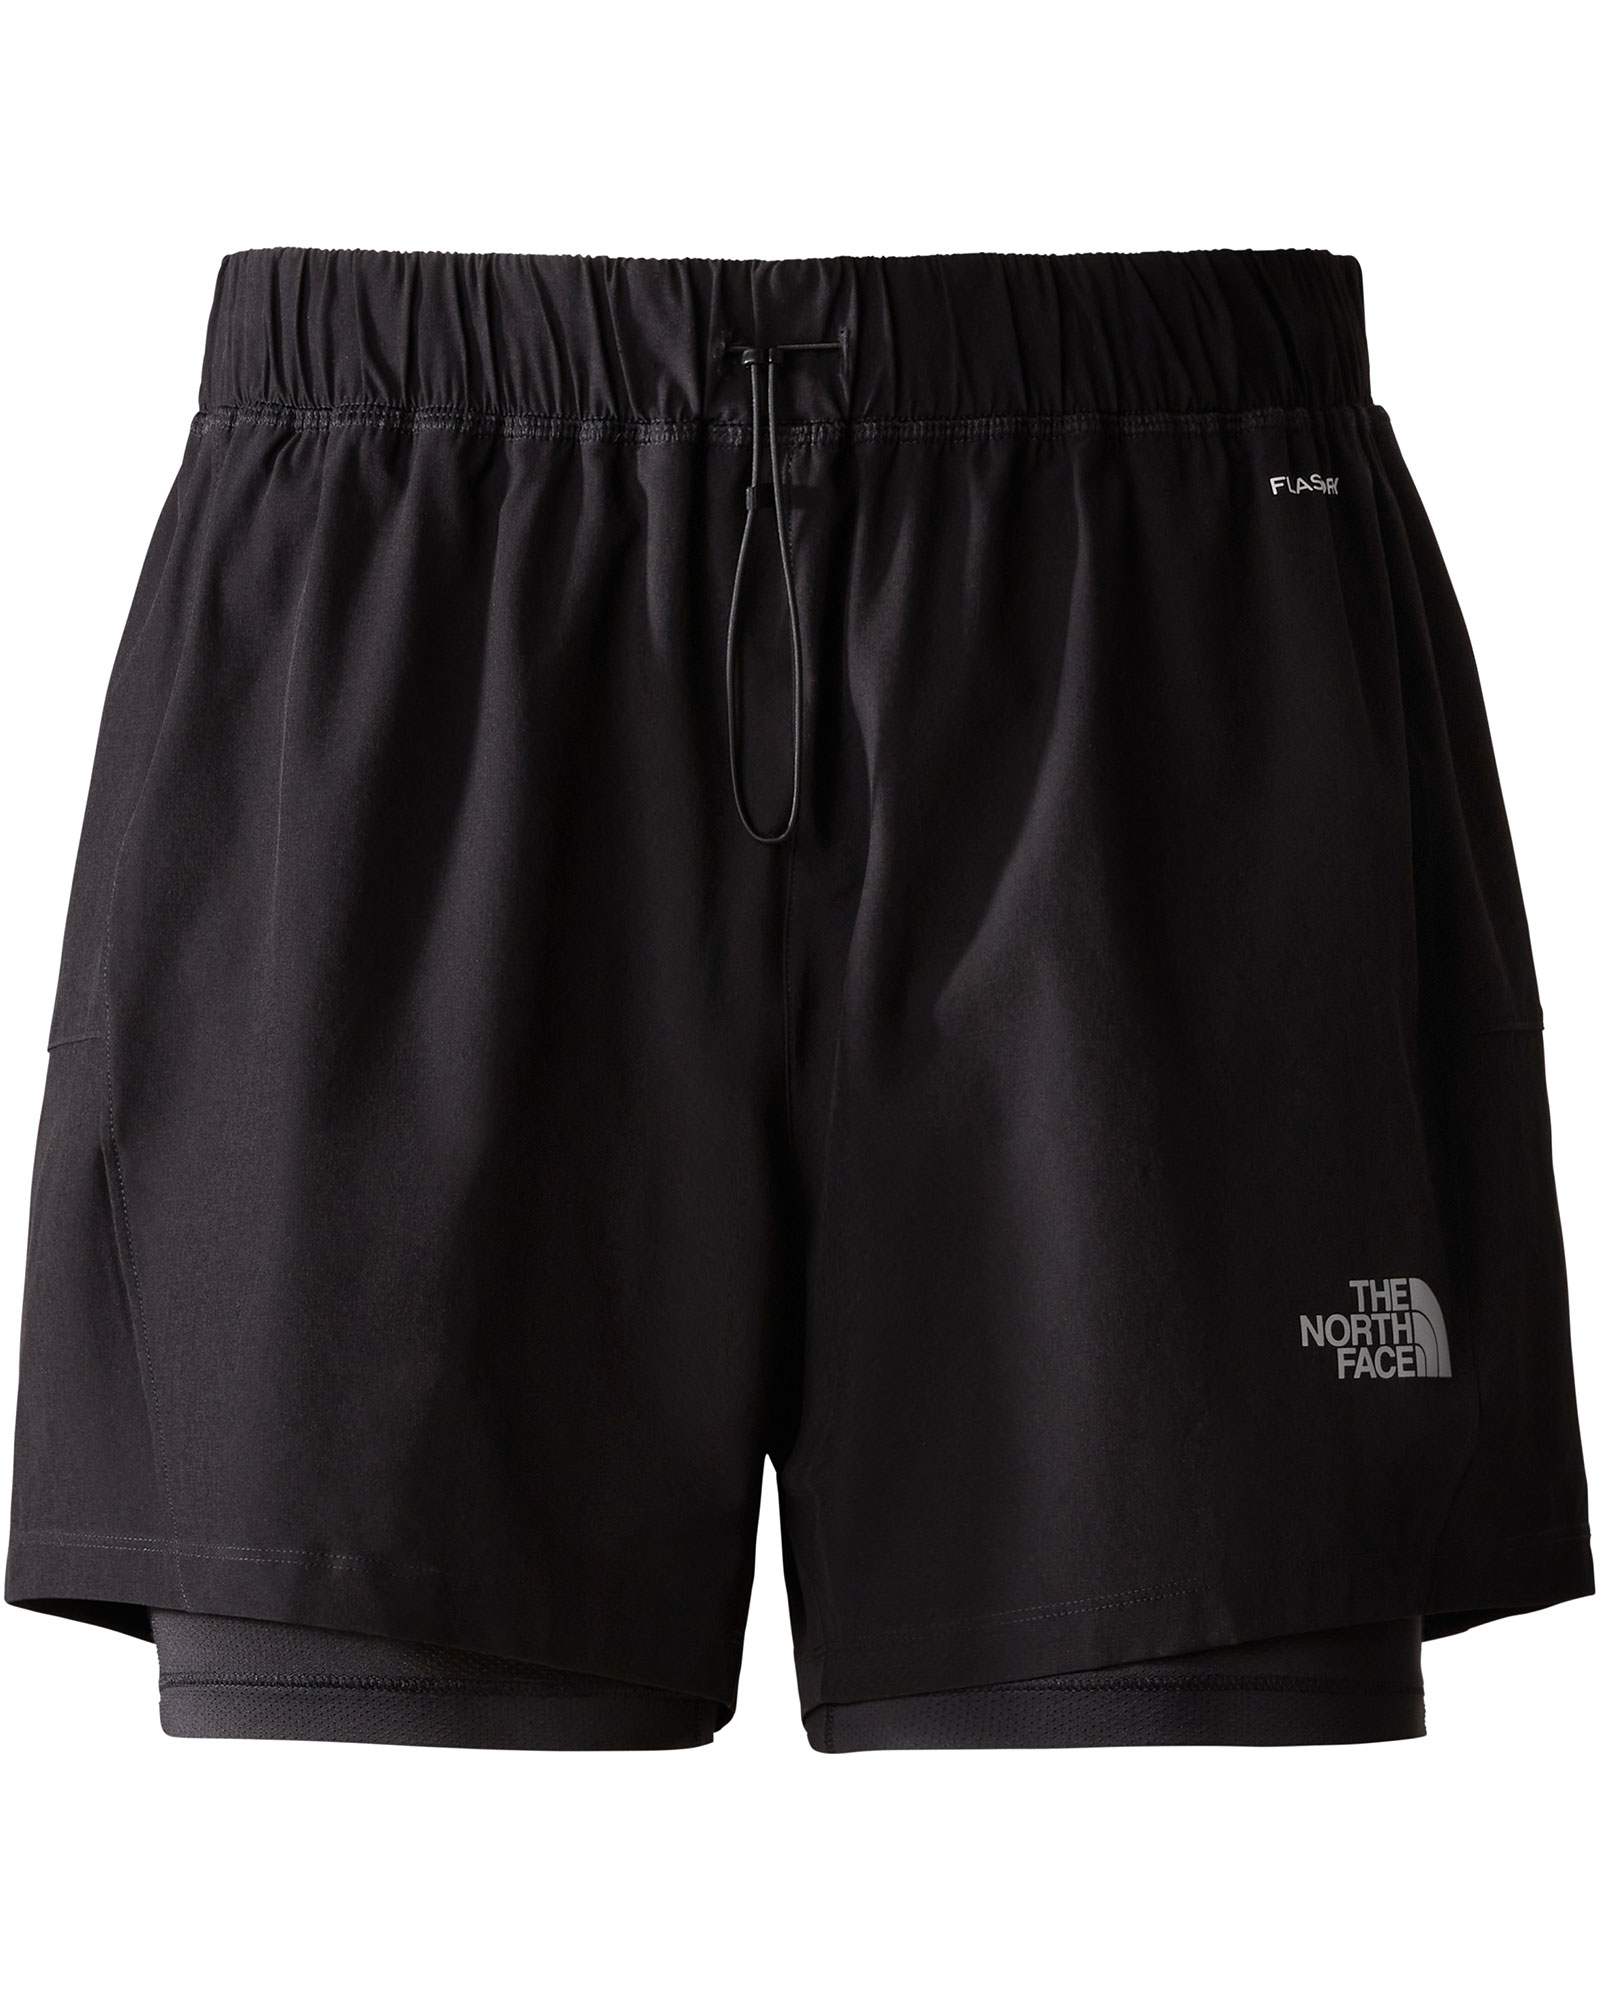 The North Face Womens 2in1 Shorts